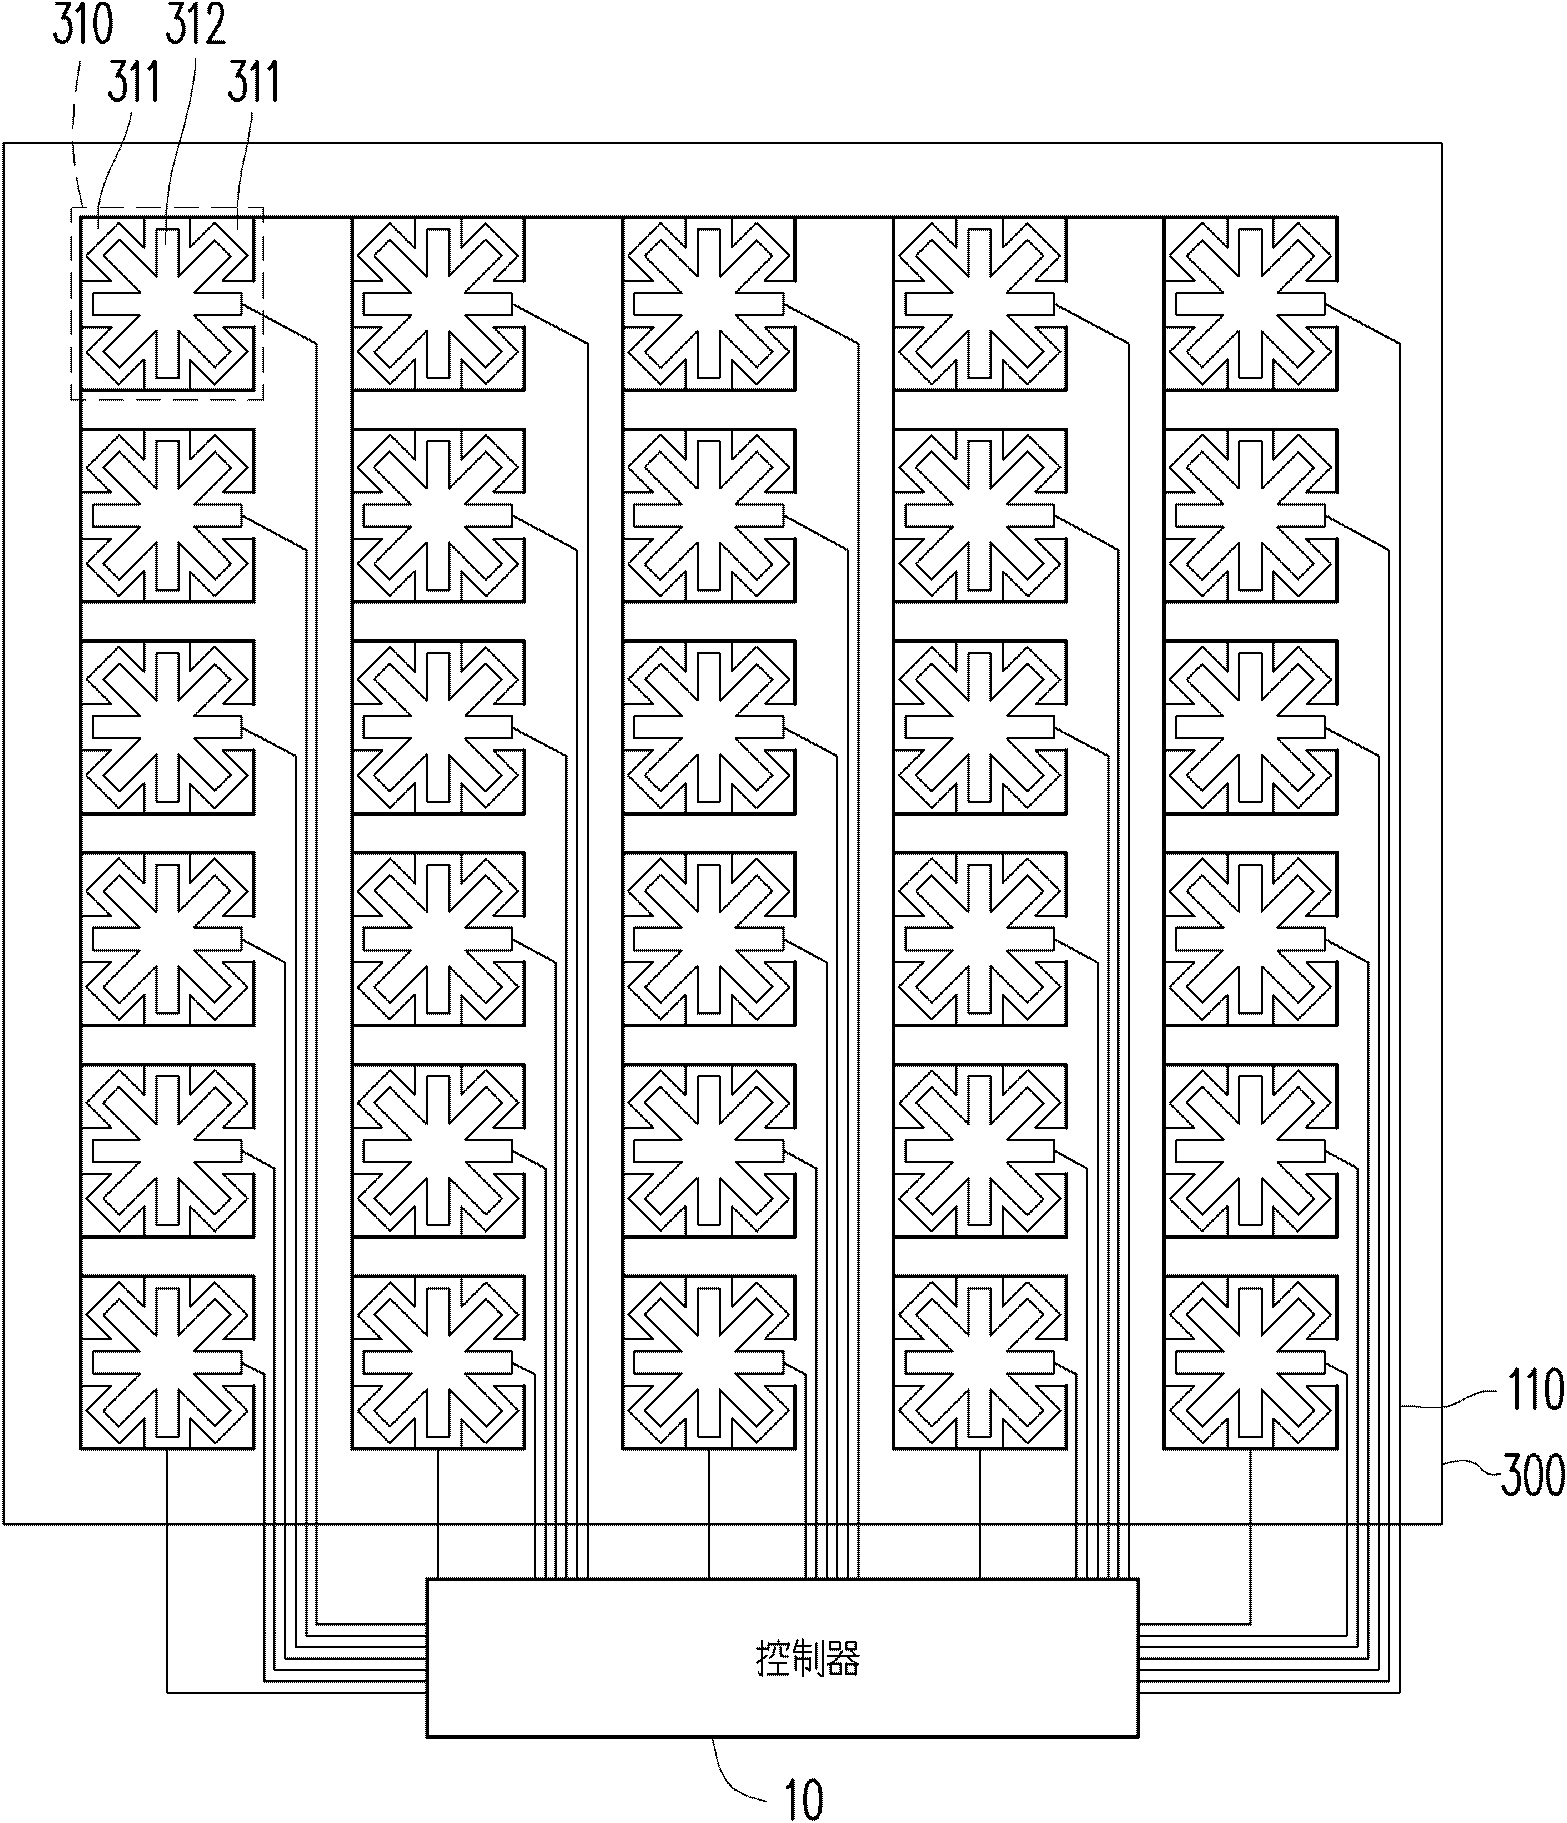 Layout structure of capacitive touch panel